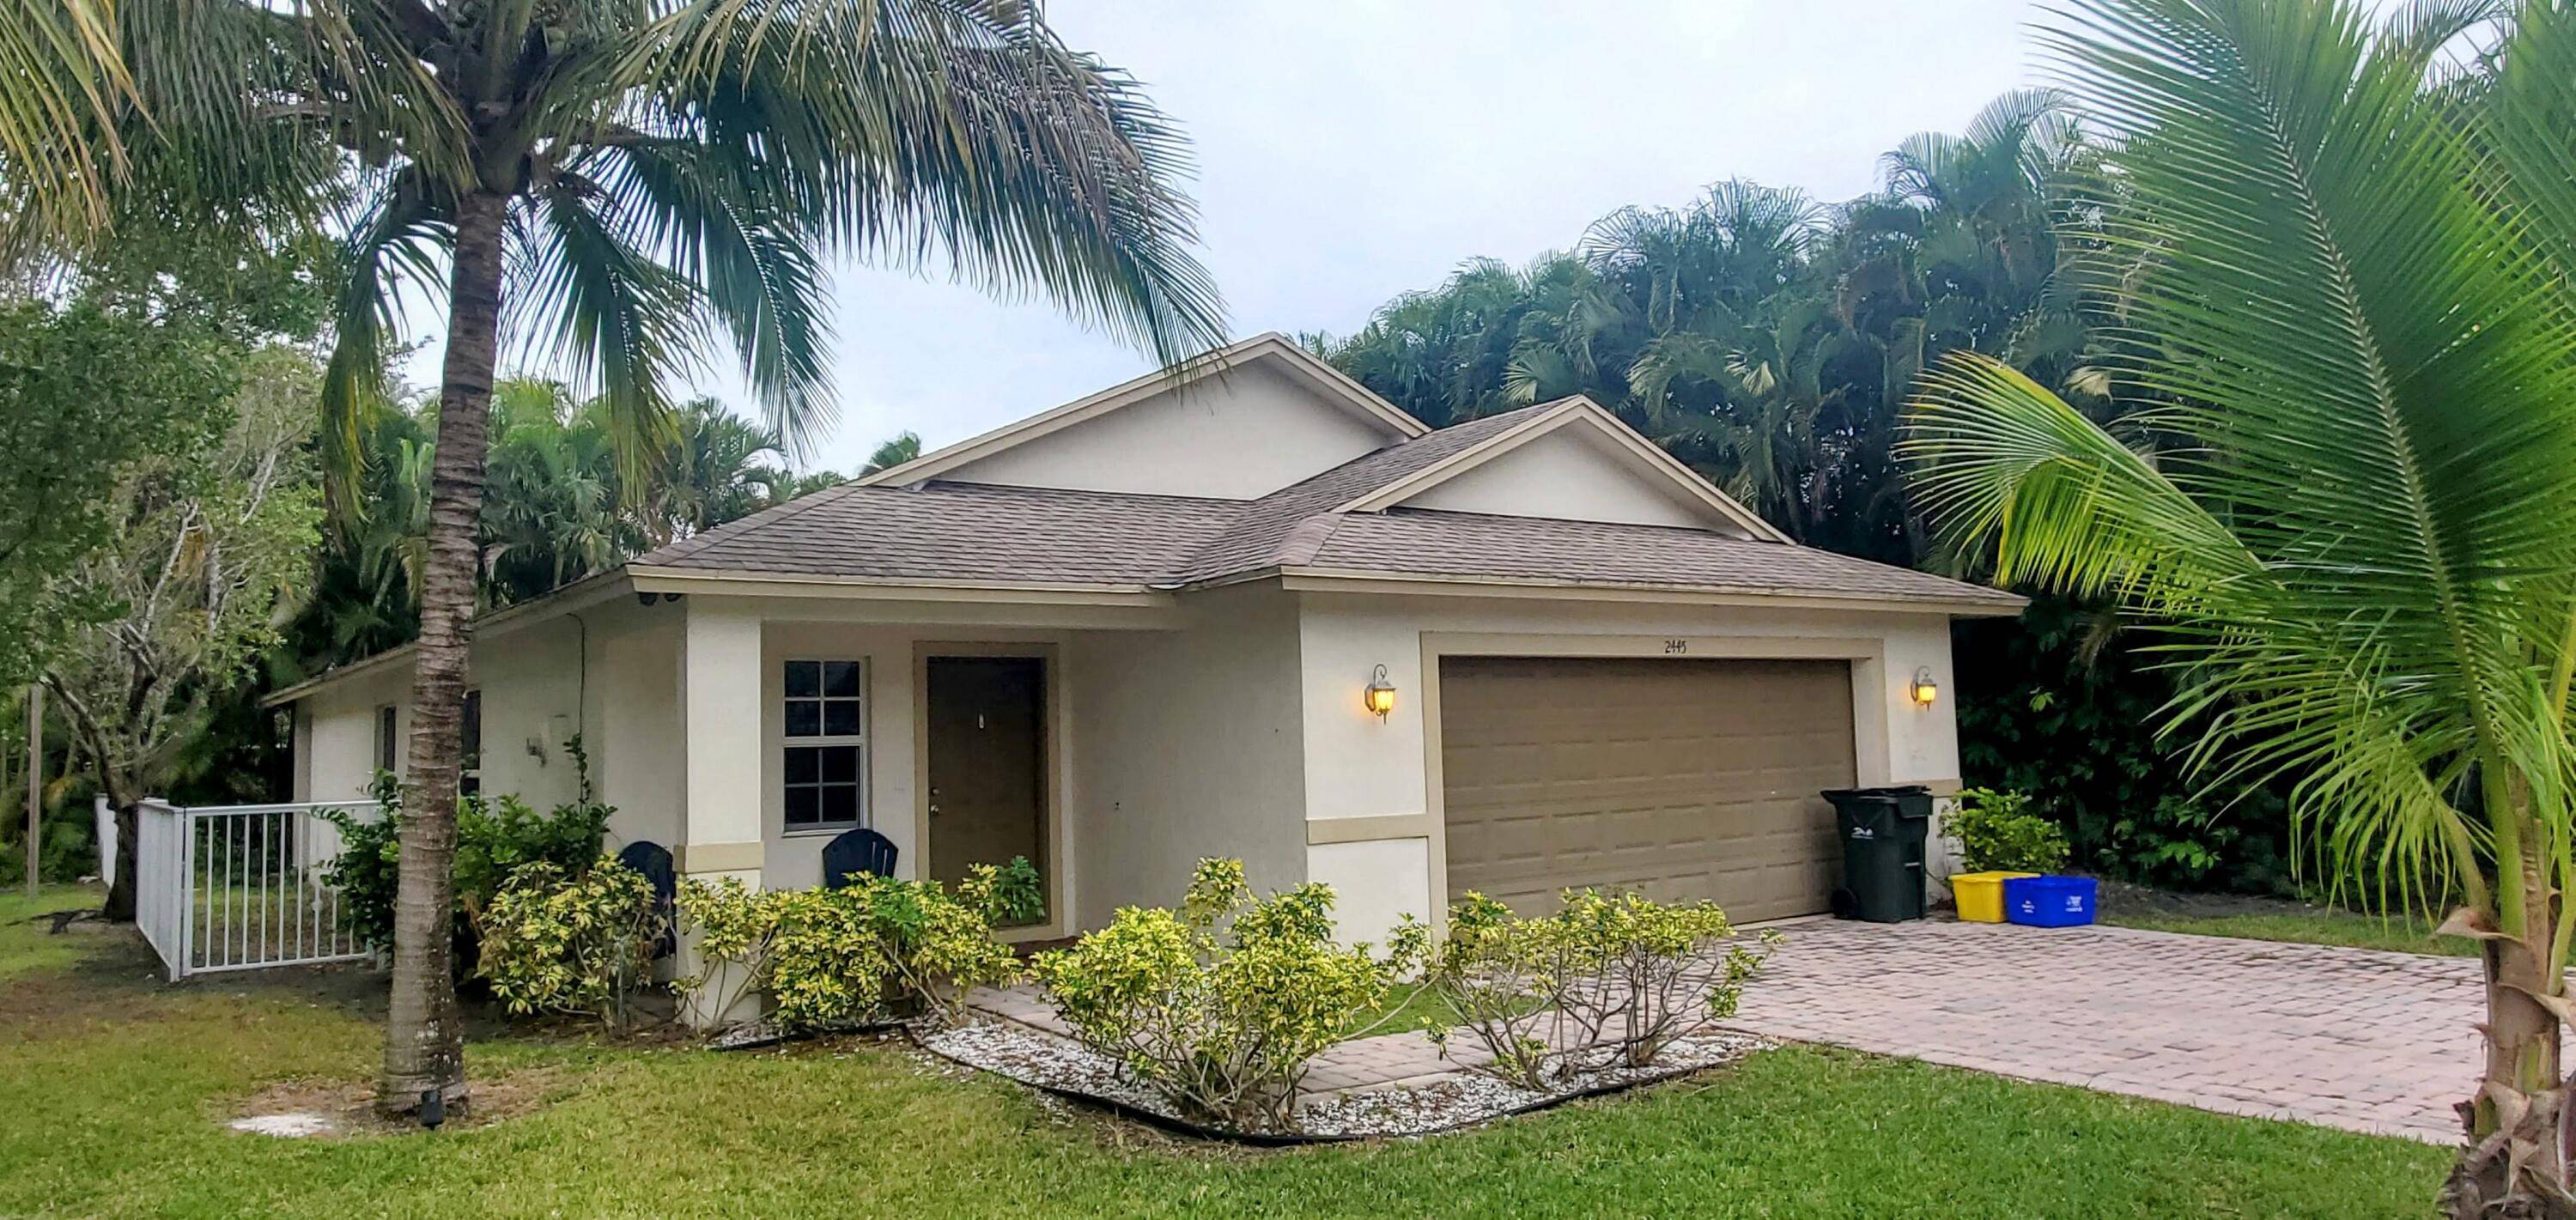 Enjoy Florida Living In This Beautifully Built Home Nestled In This Quiet Desirable East Delray Community.